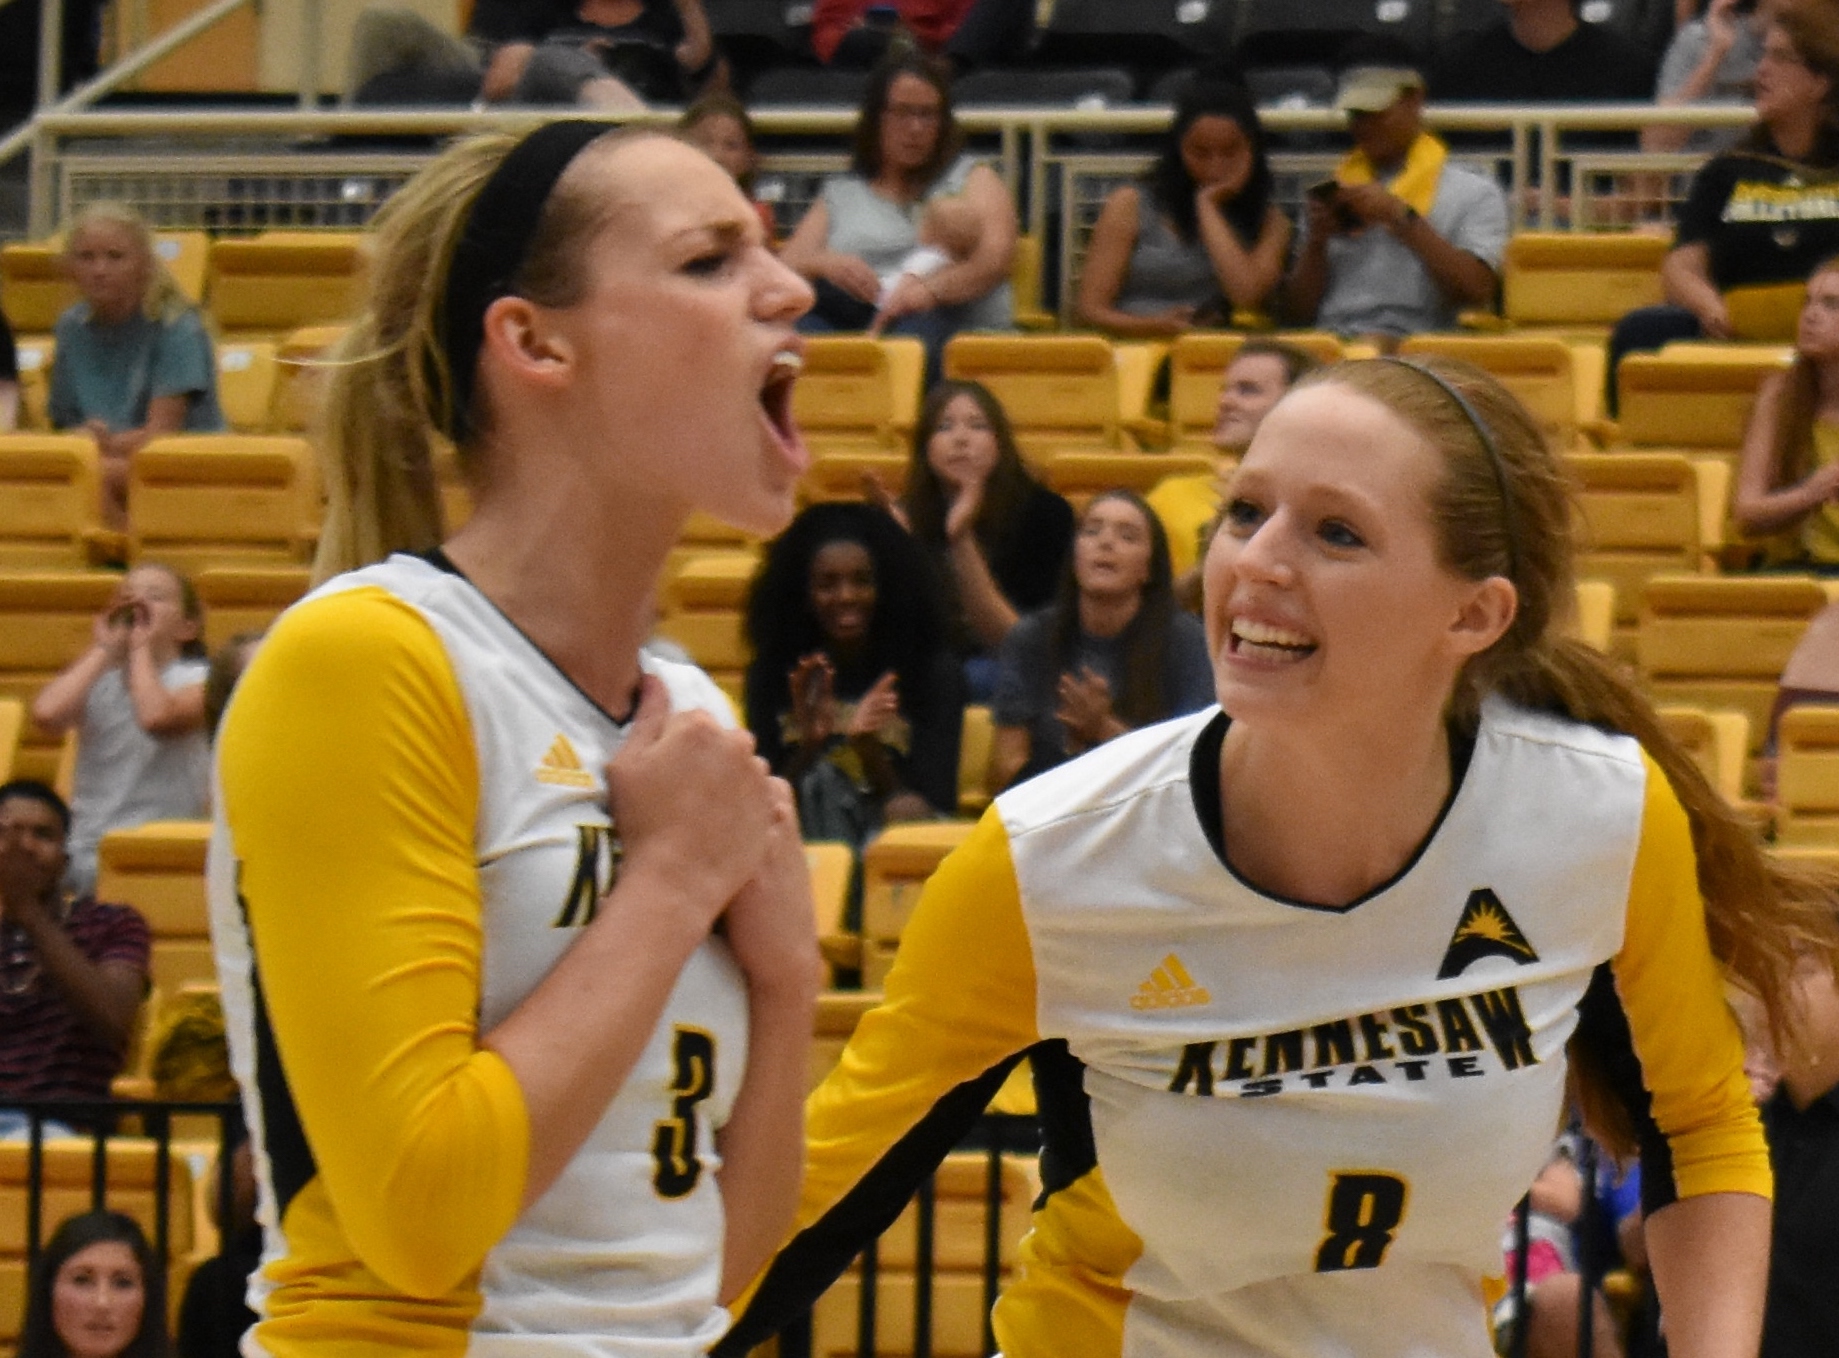 KSU volleyball escapes with first conference win